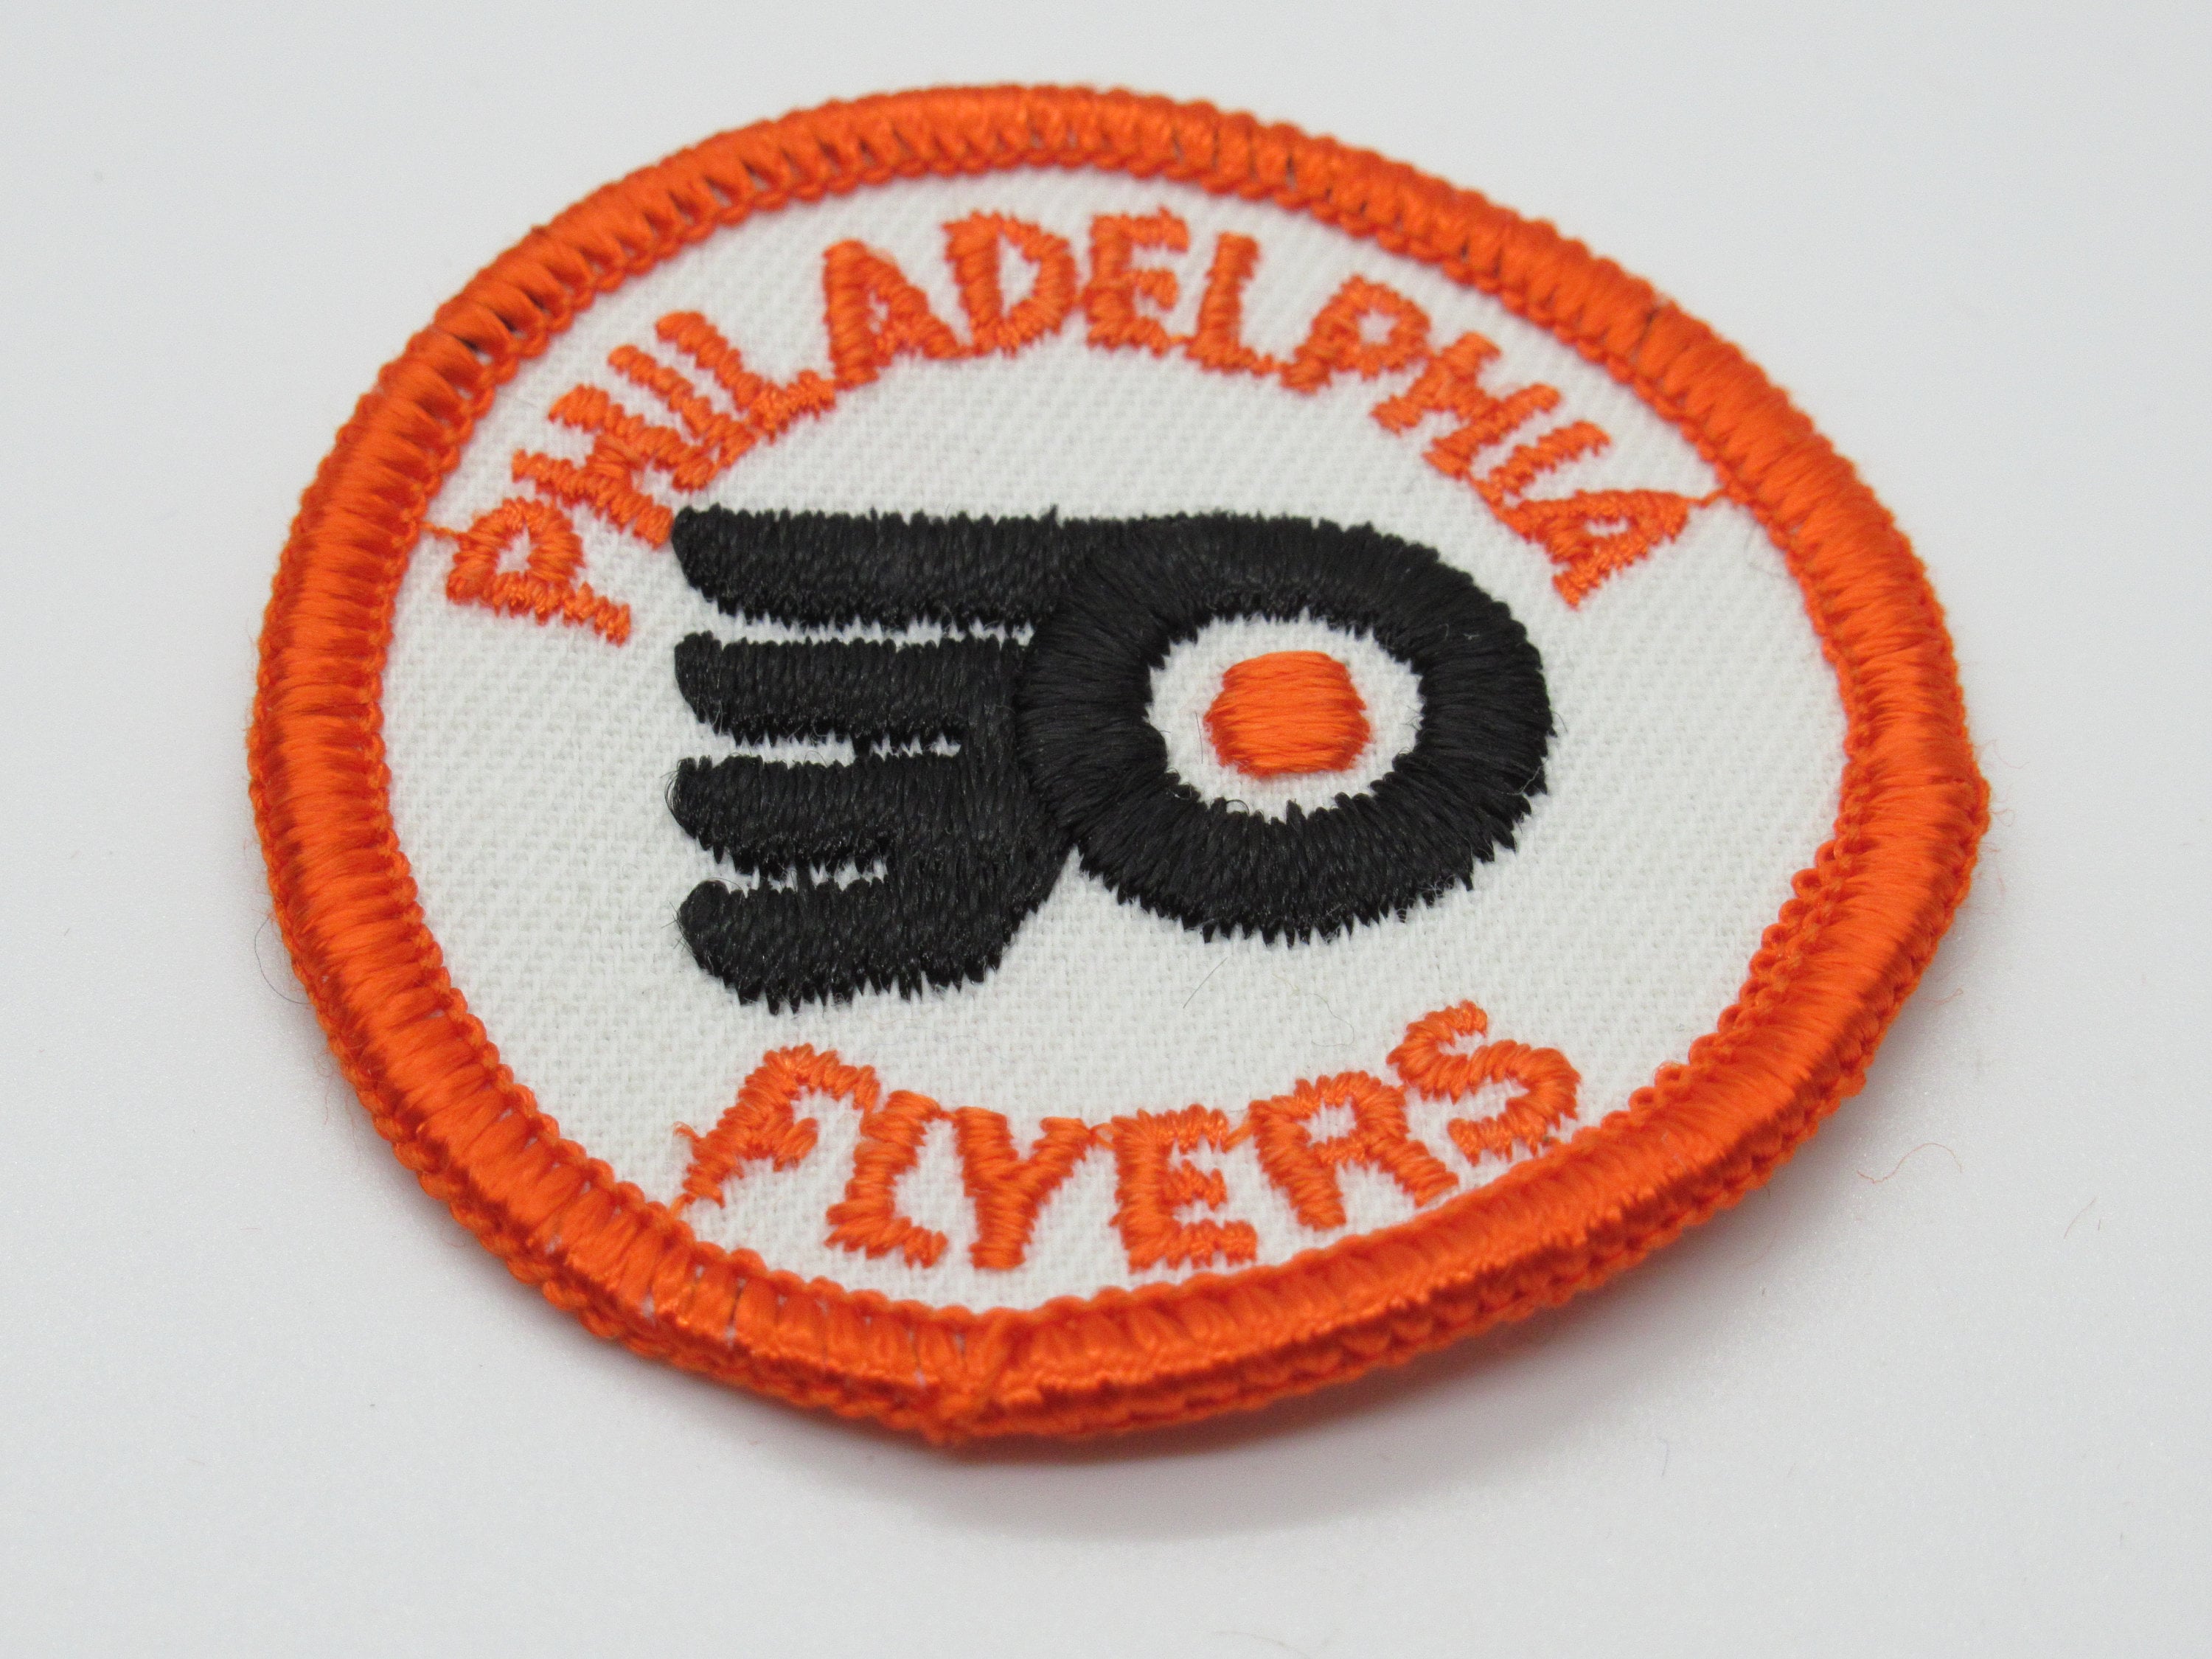 Philadelphia Flyers Embroidered Team Logo Collectible Patch